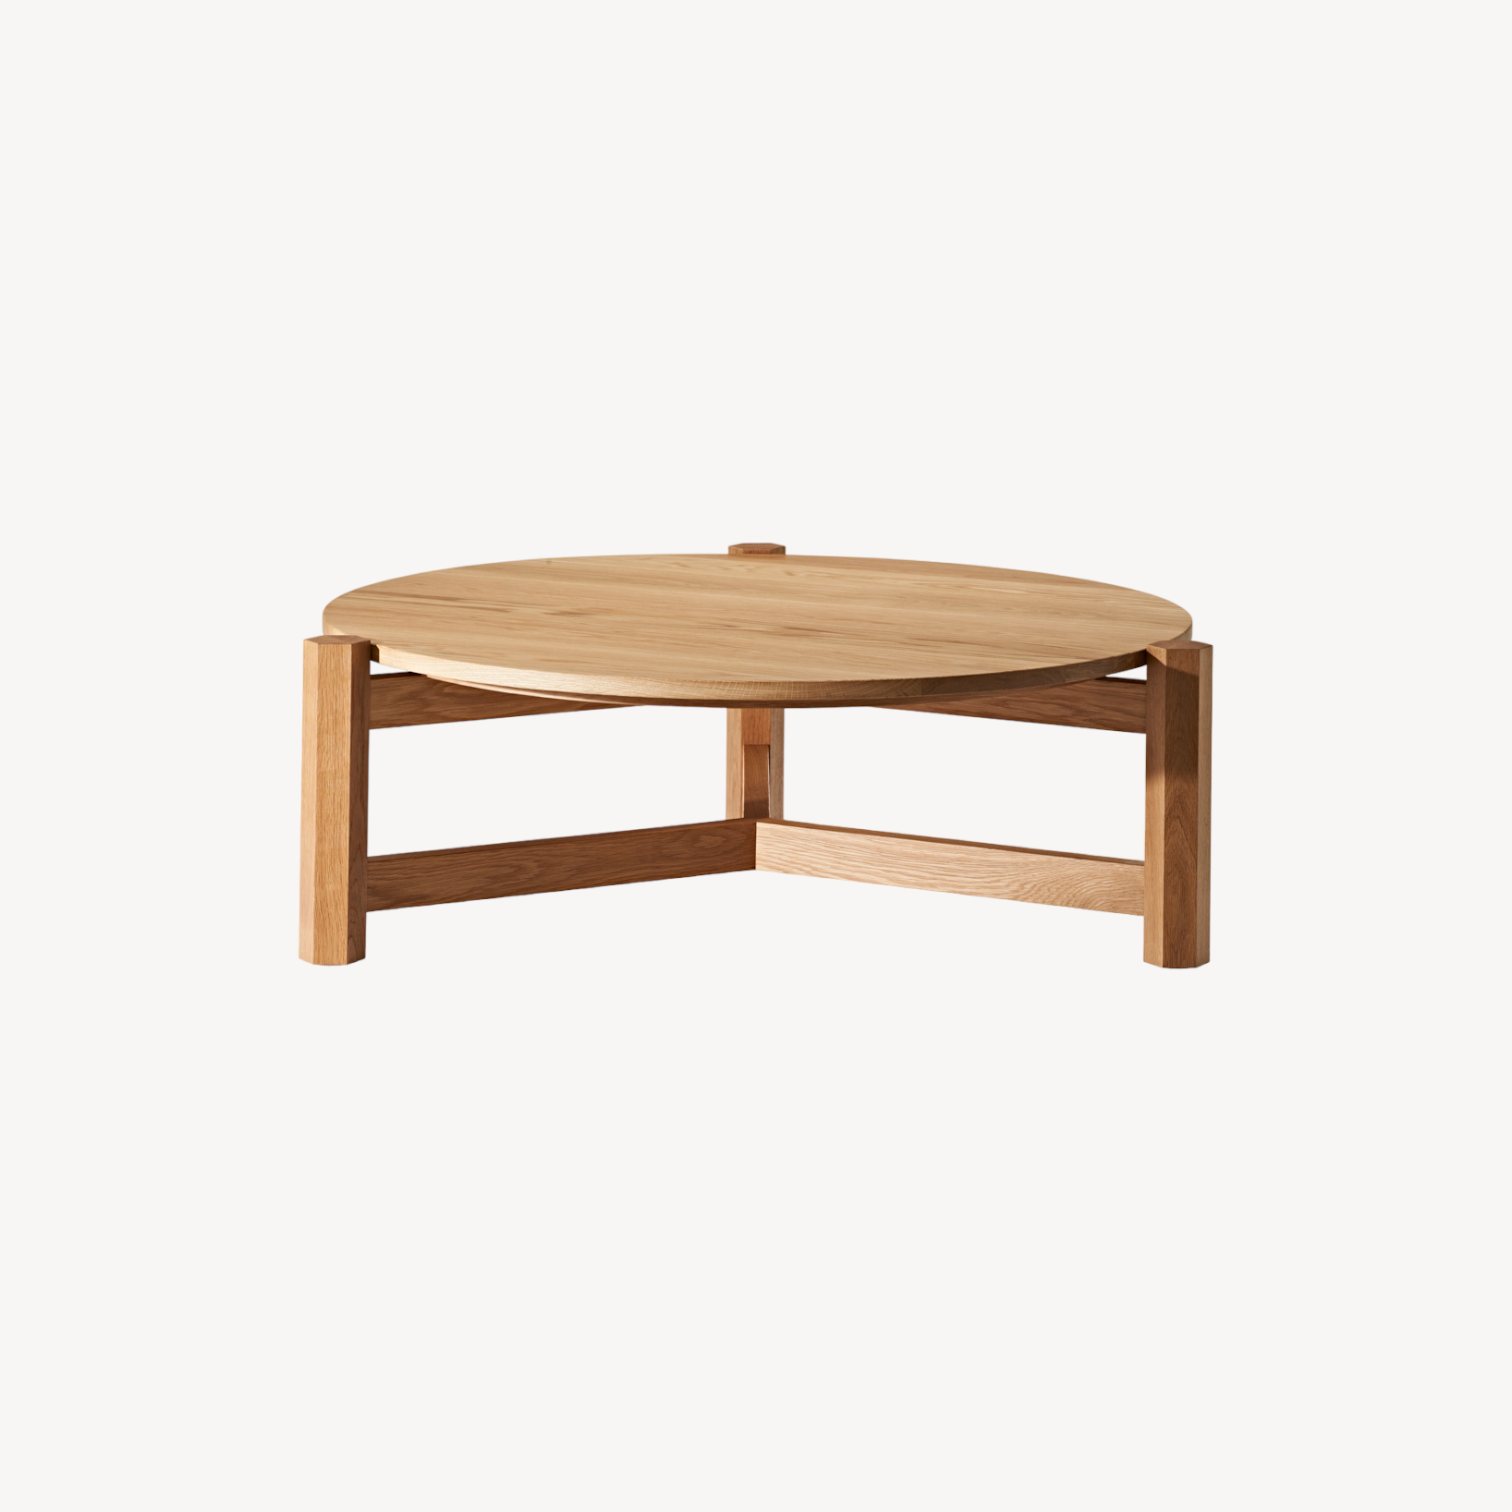 Tribute Timber Coffee Table - Zuster Furniture